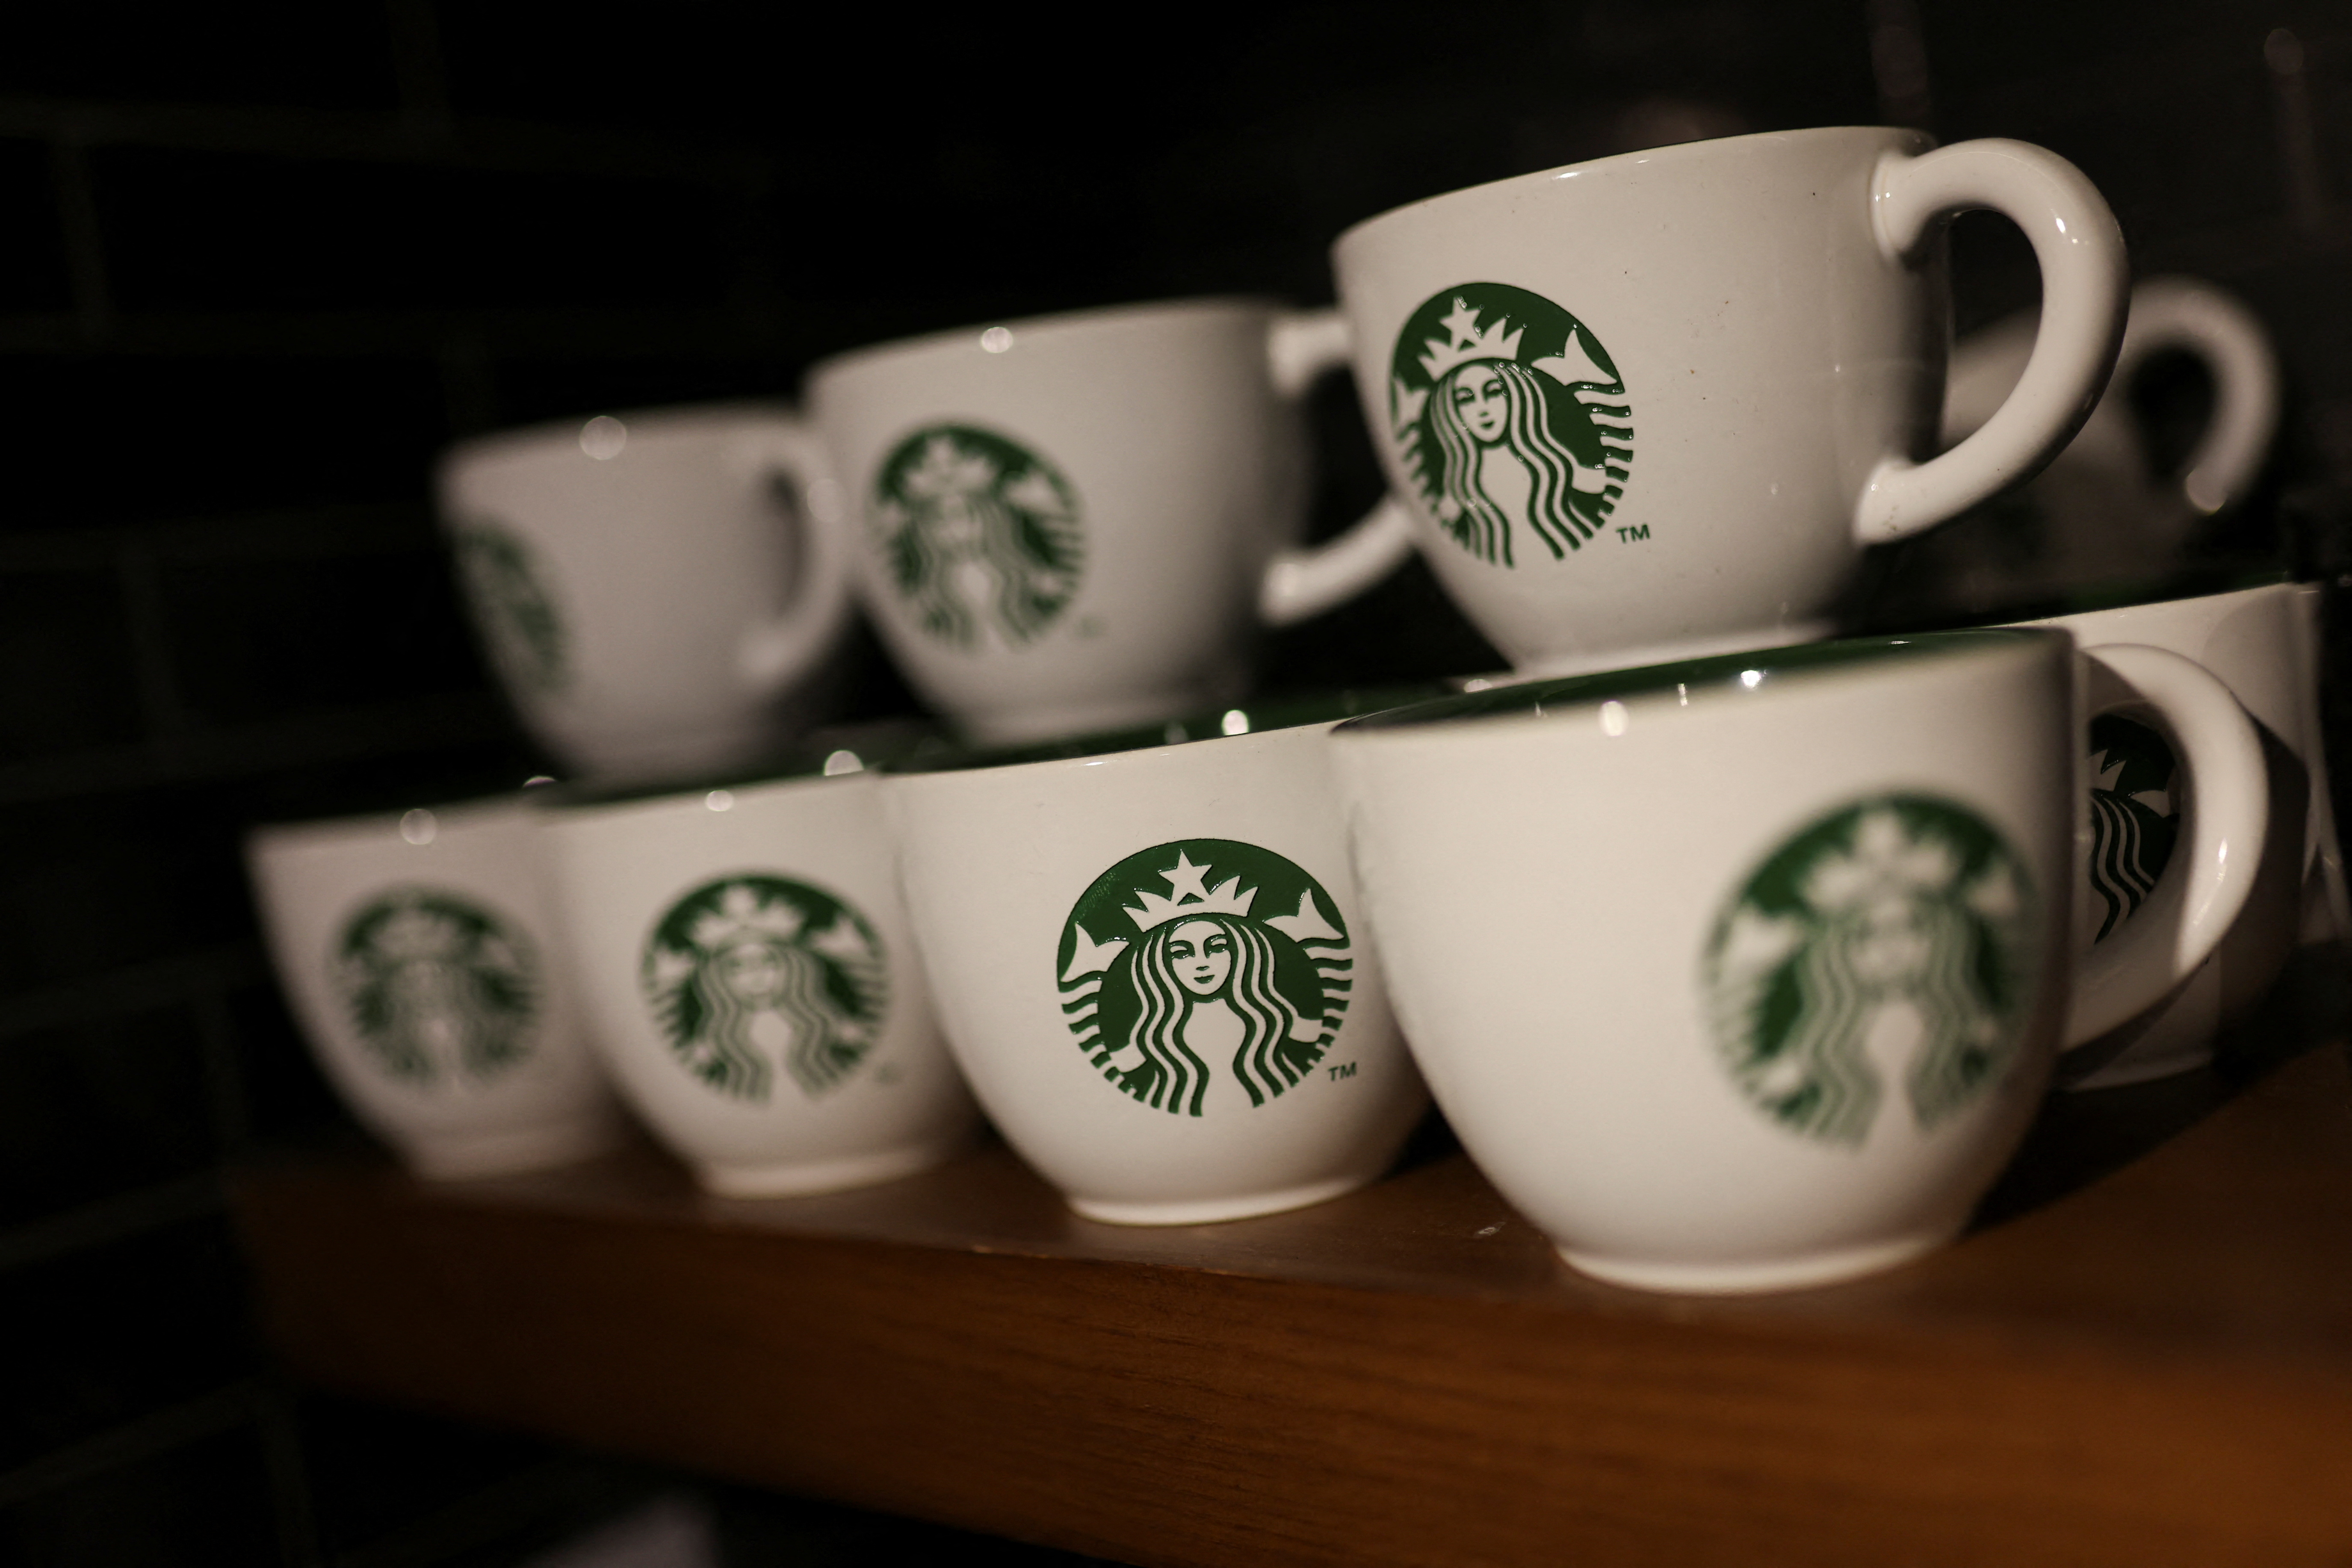 Branded coffee mugs are displayed in Starbucks' outlet at a market in New Delhi